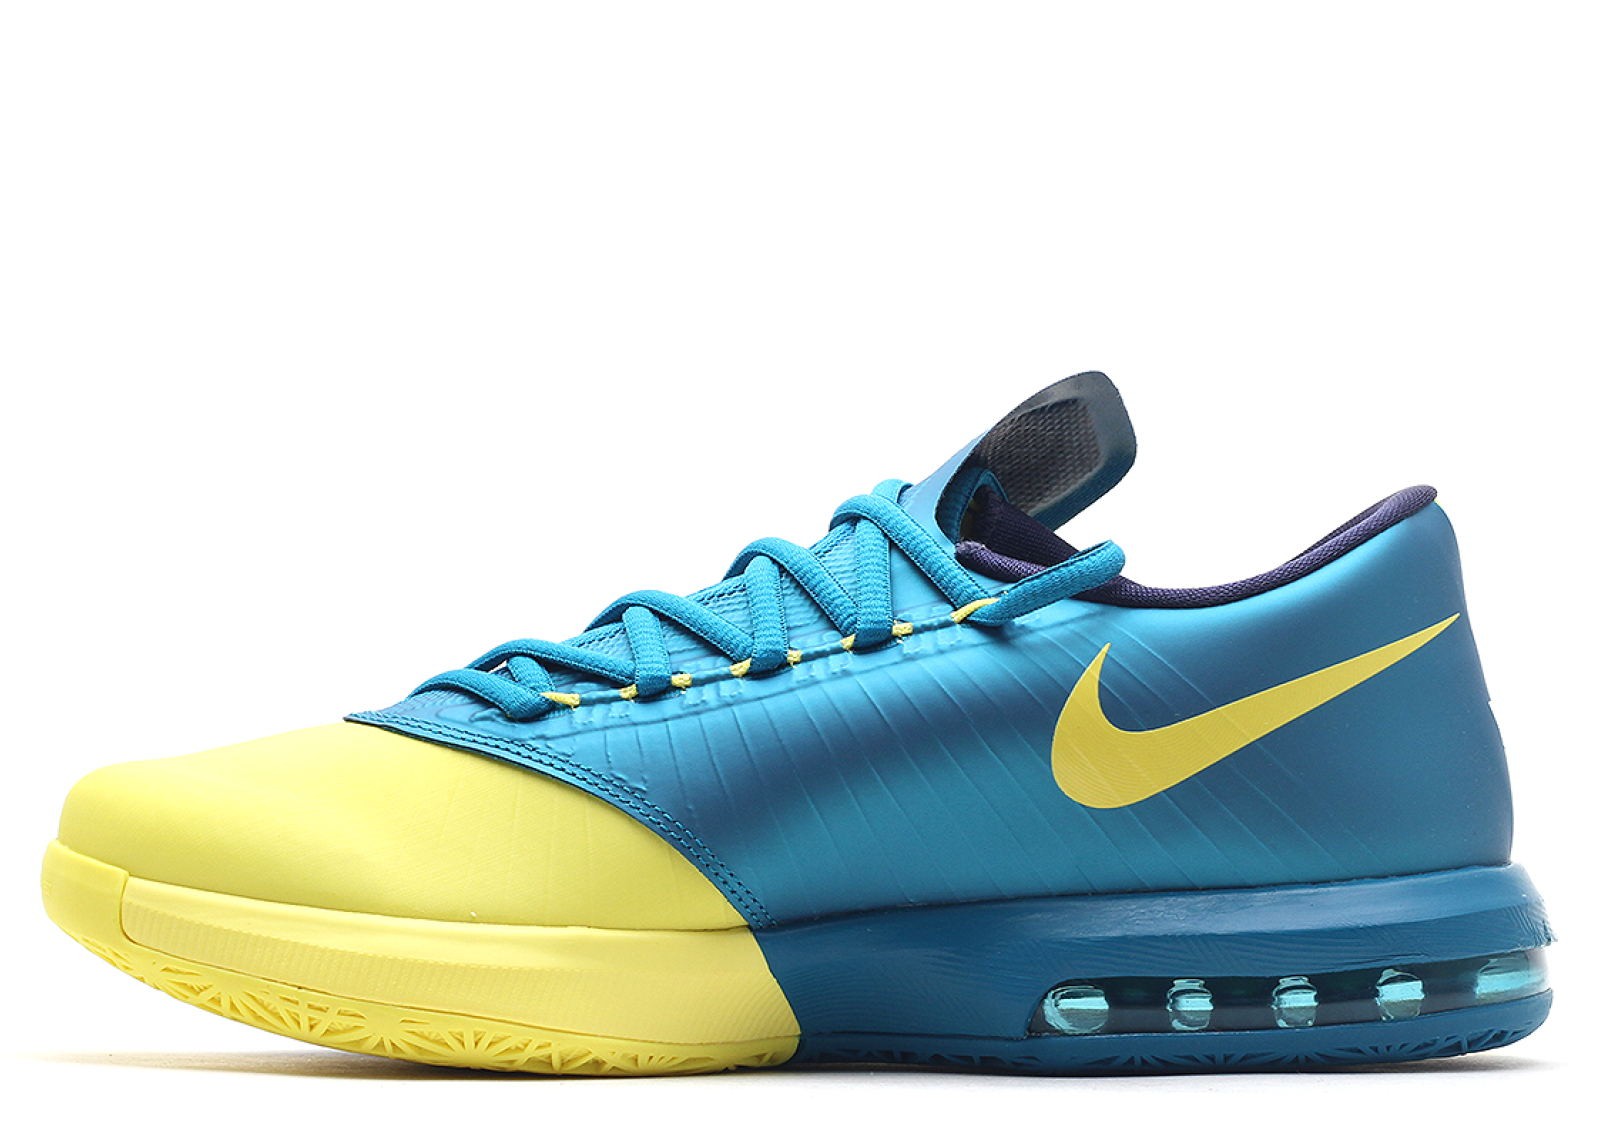 kd 6 yellow and blue